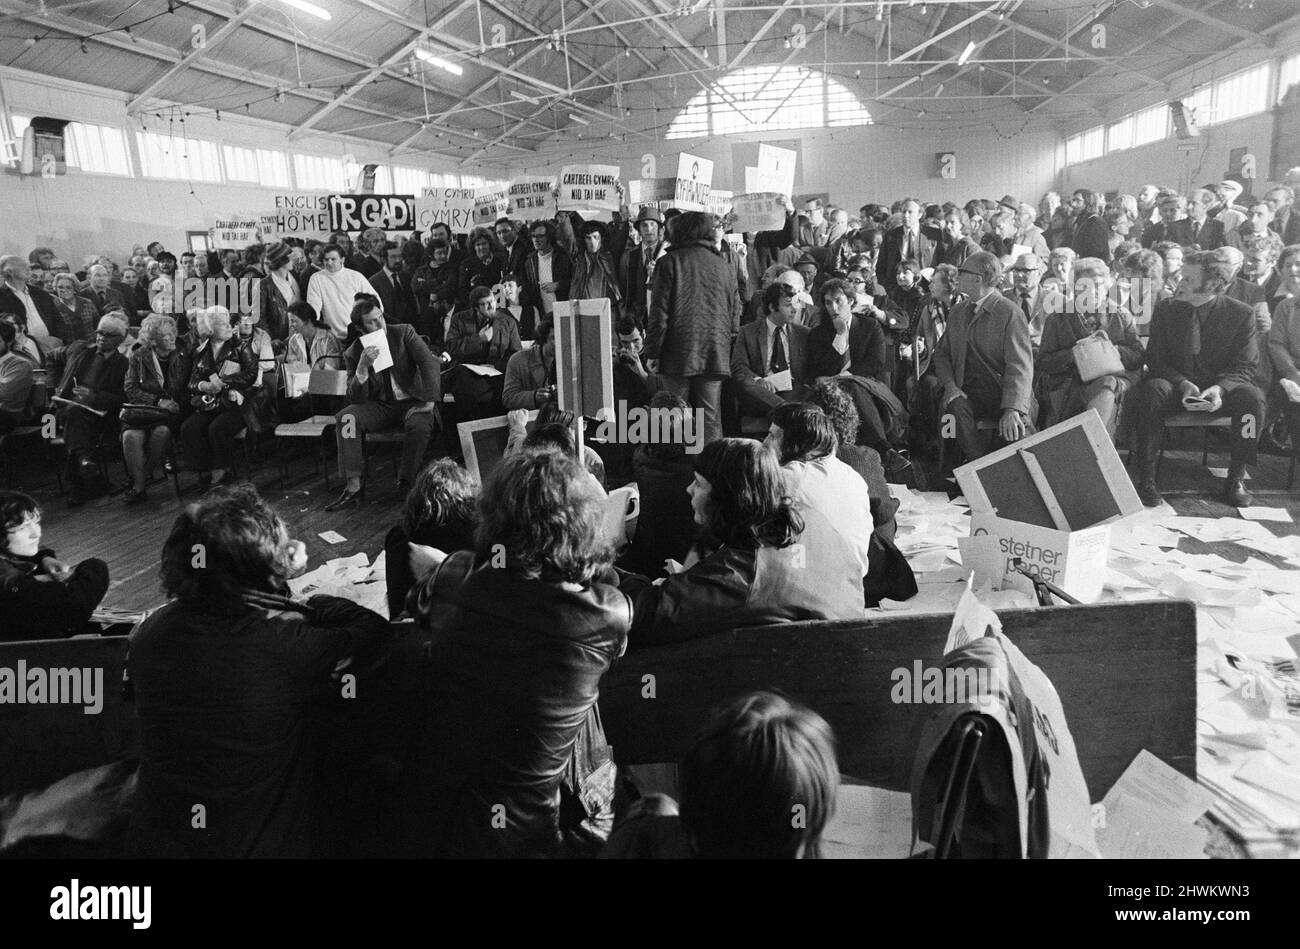 Welsh Nationalists sit down demonstration in the Territorial Army Drill Hall at Caernarfon, Gwynedd, Wales, Friday 7th July 1972. The demonstrators were protesting against the auction of country cottages. Stock Photo